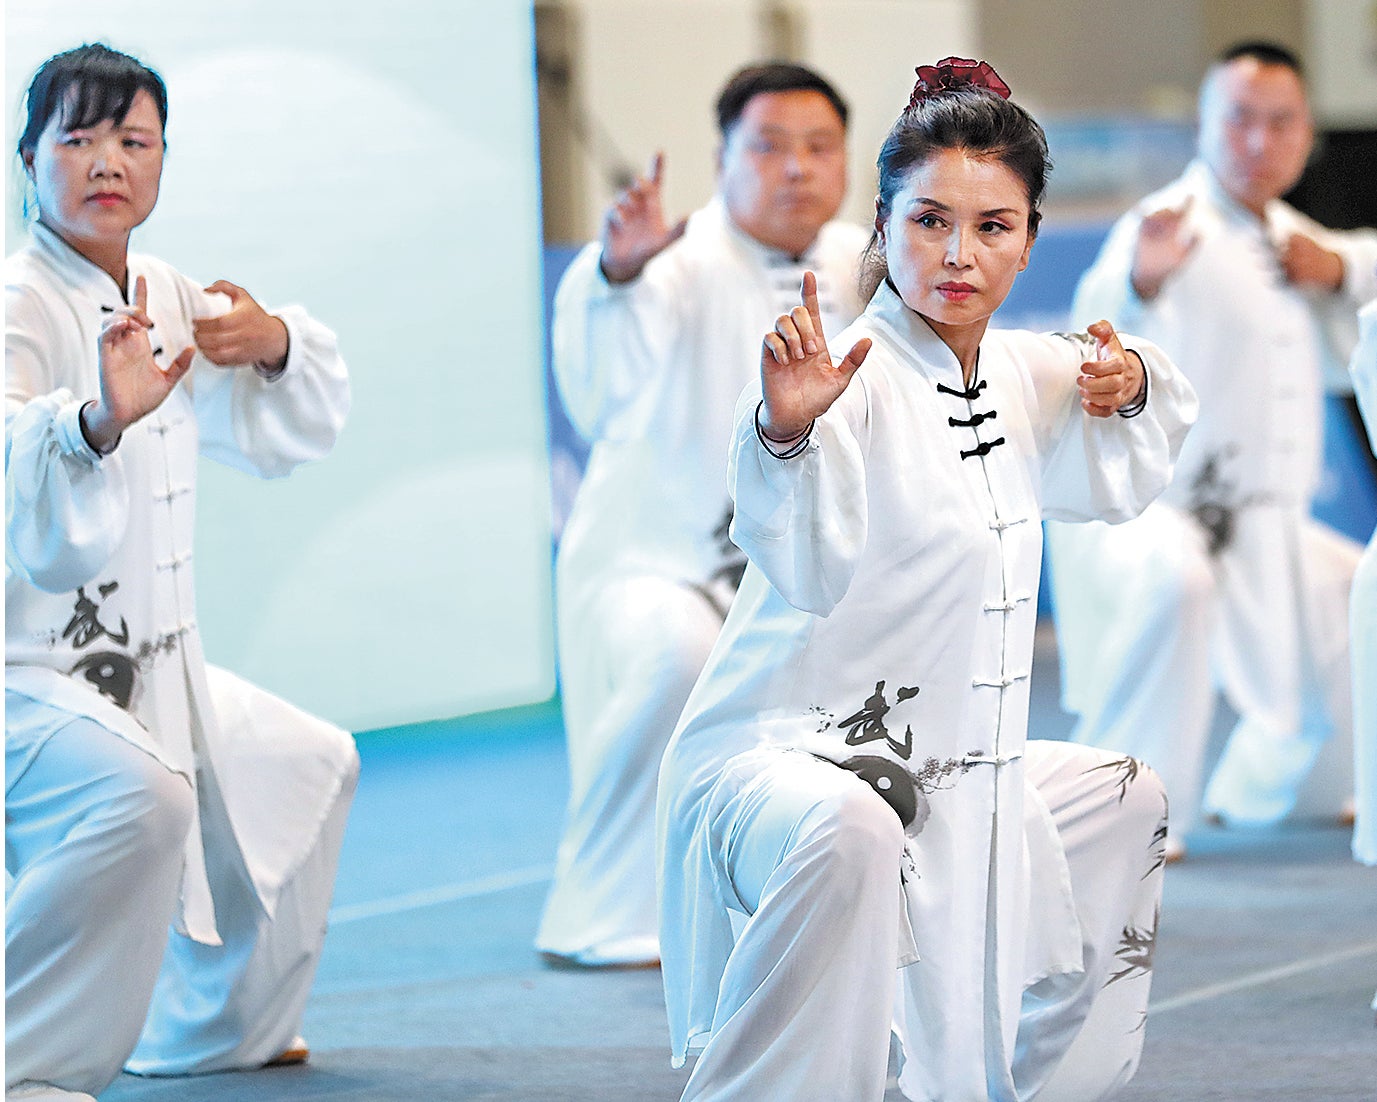 Baduanjin competitors at the recently held 11th Session of National Traditional Sports in Beijing